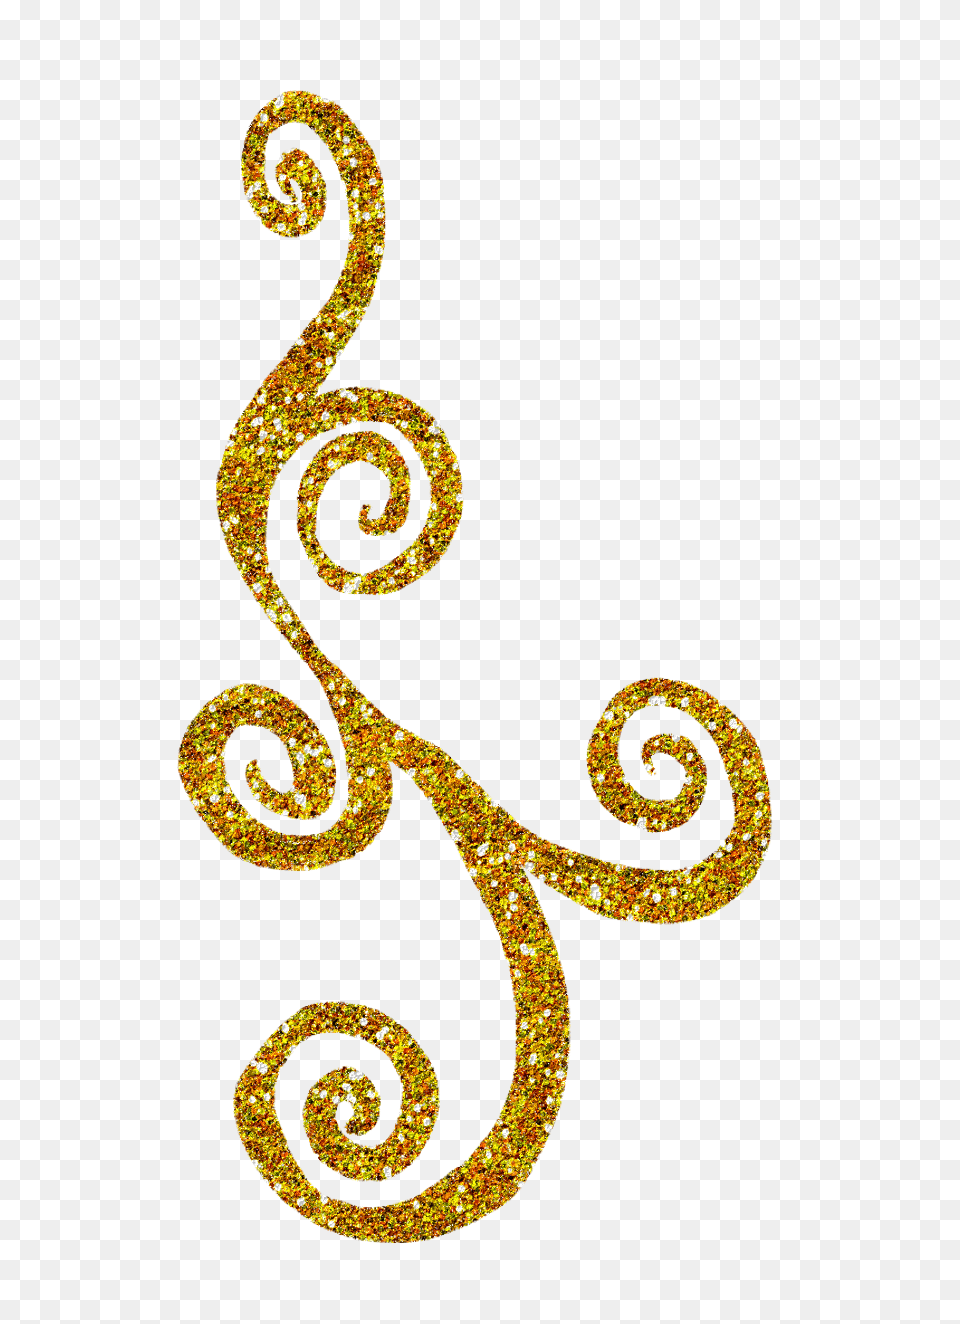 Library Of Silver Glittery Crown Picture Gold Glitter Swirls Clipart Png